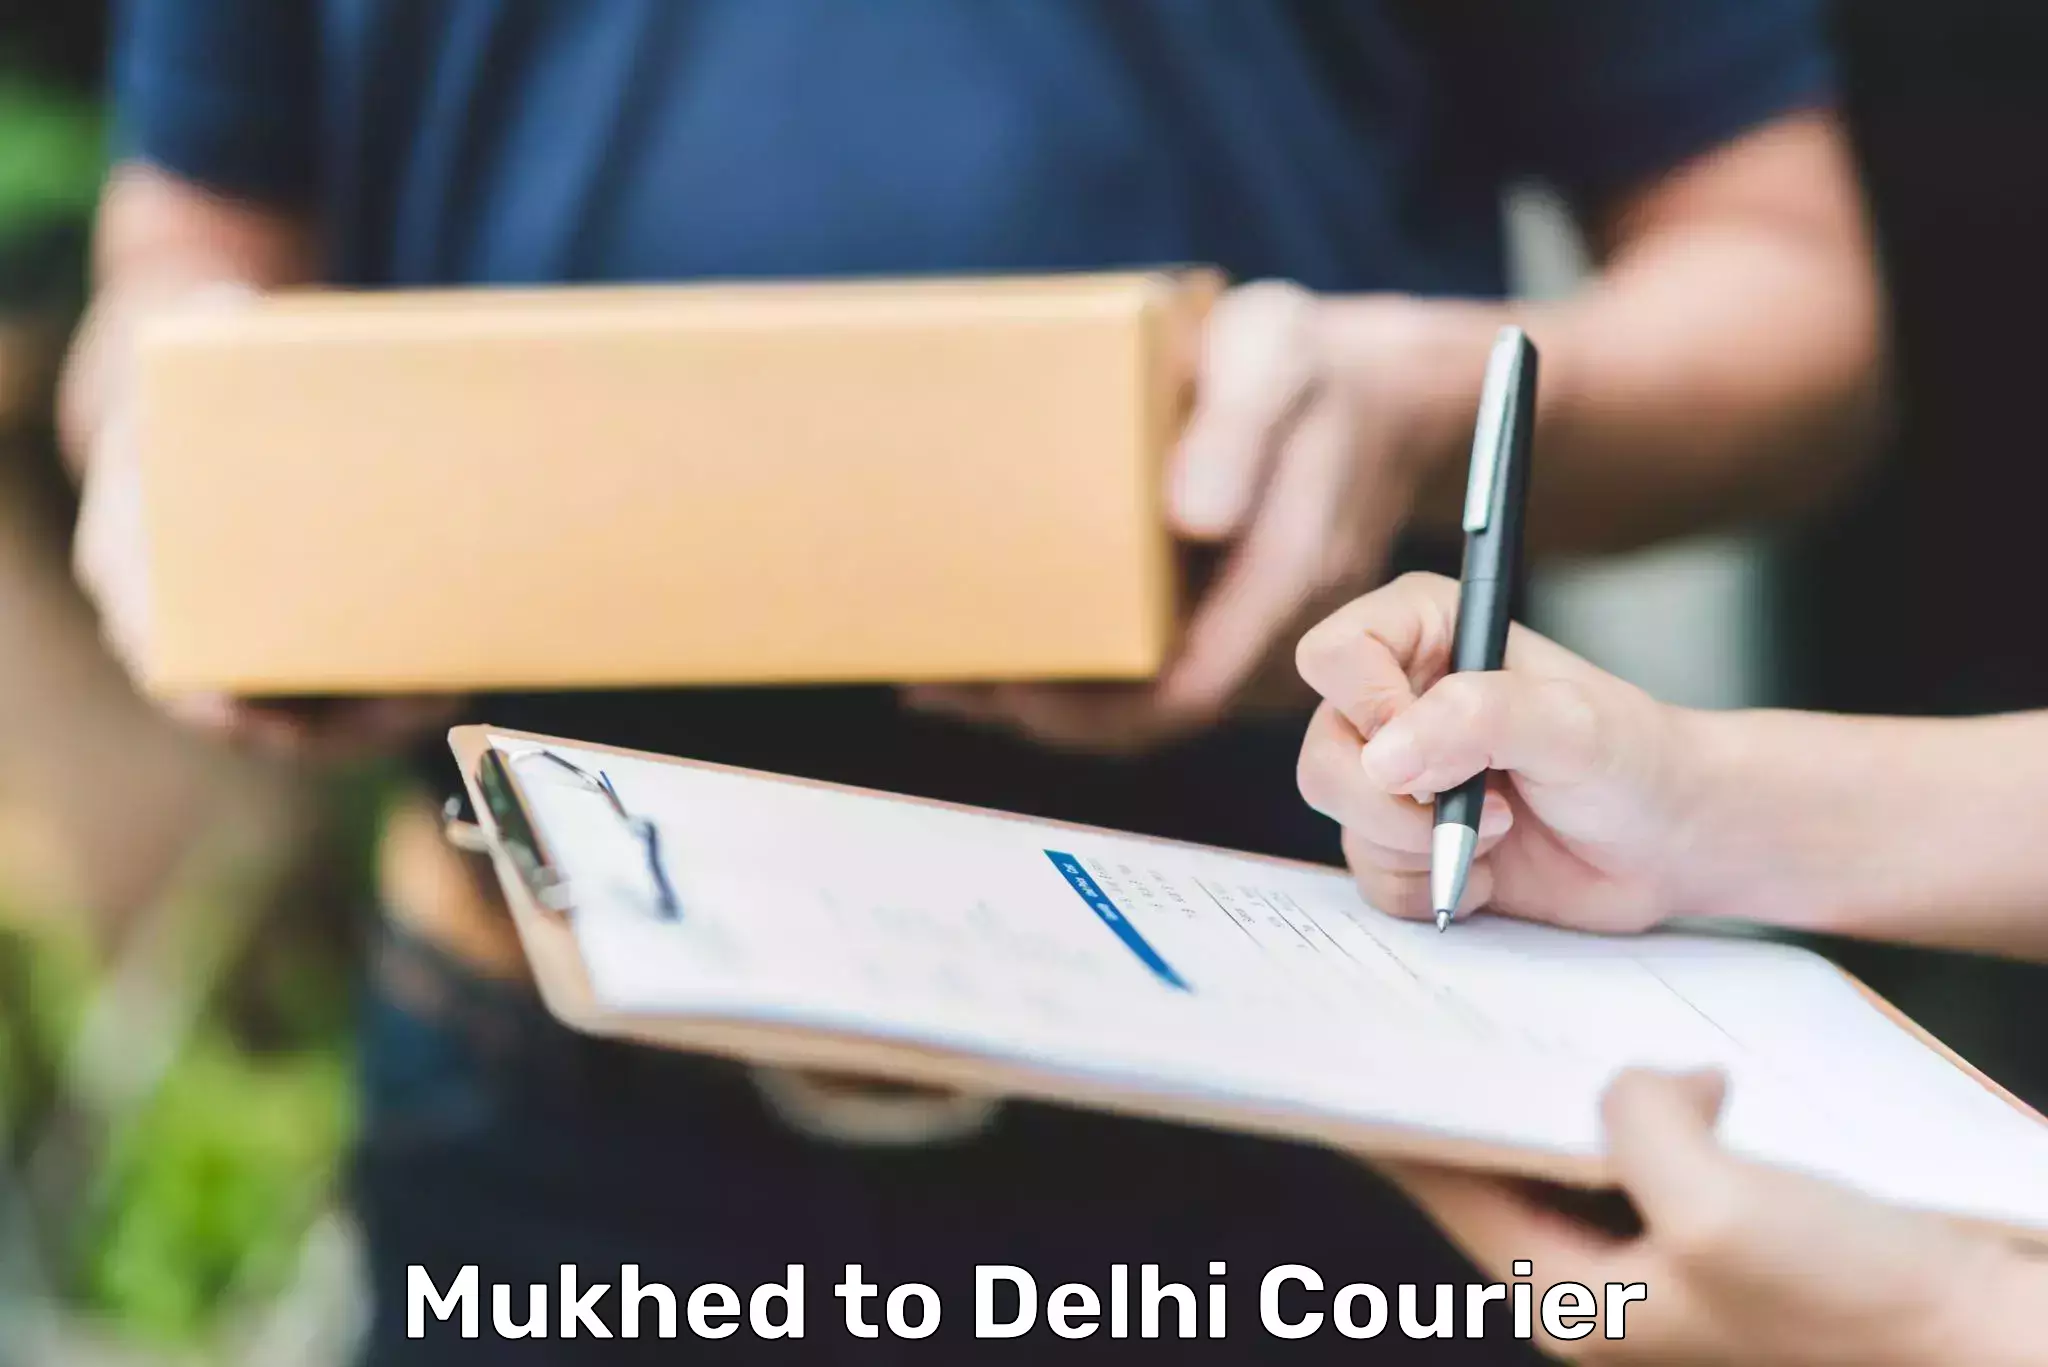 Express mail service Mukhed to University of Delhi